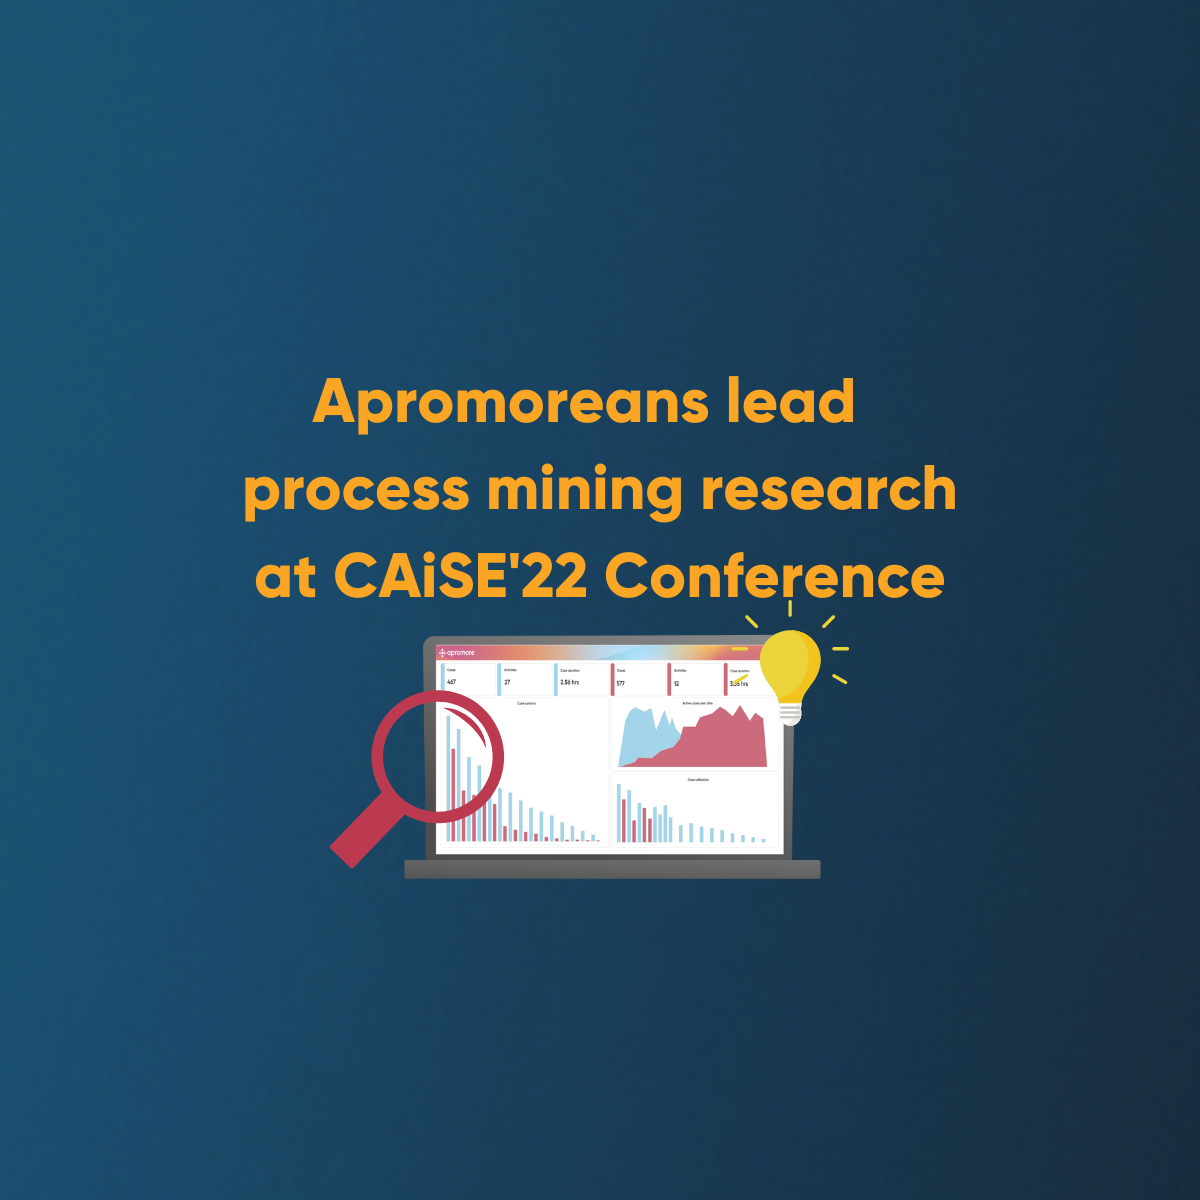 Apromoreans lead process mining research at CAiSE Conference 2022